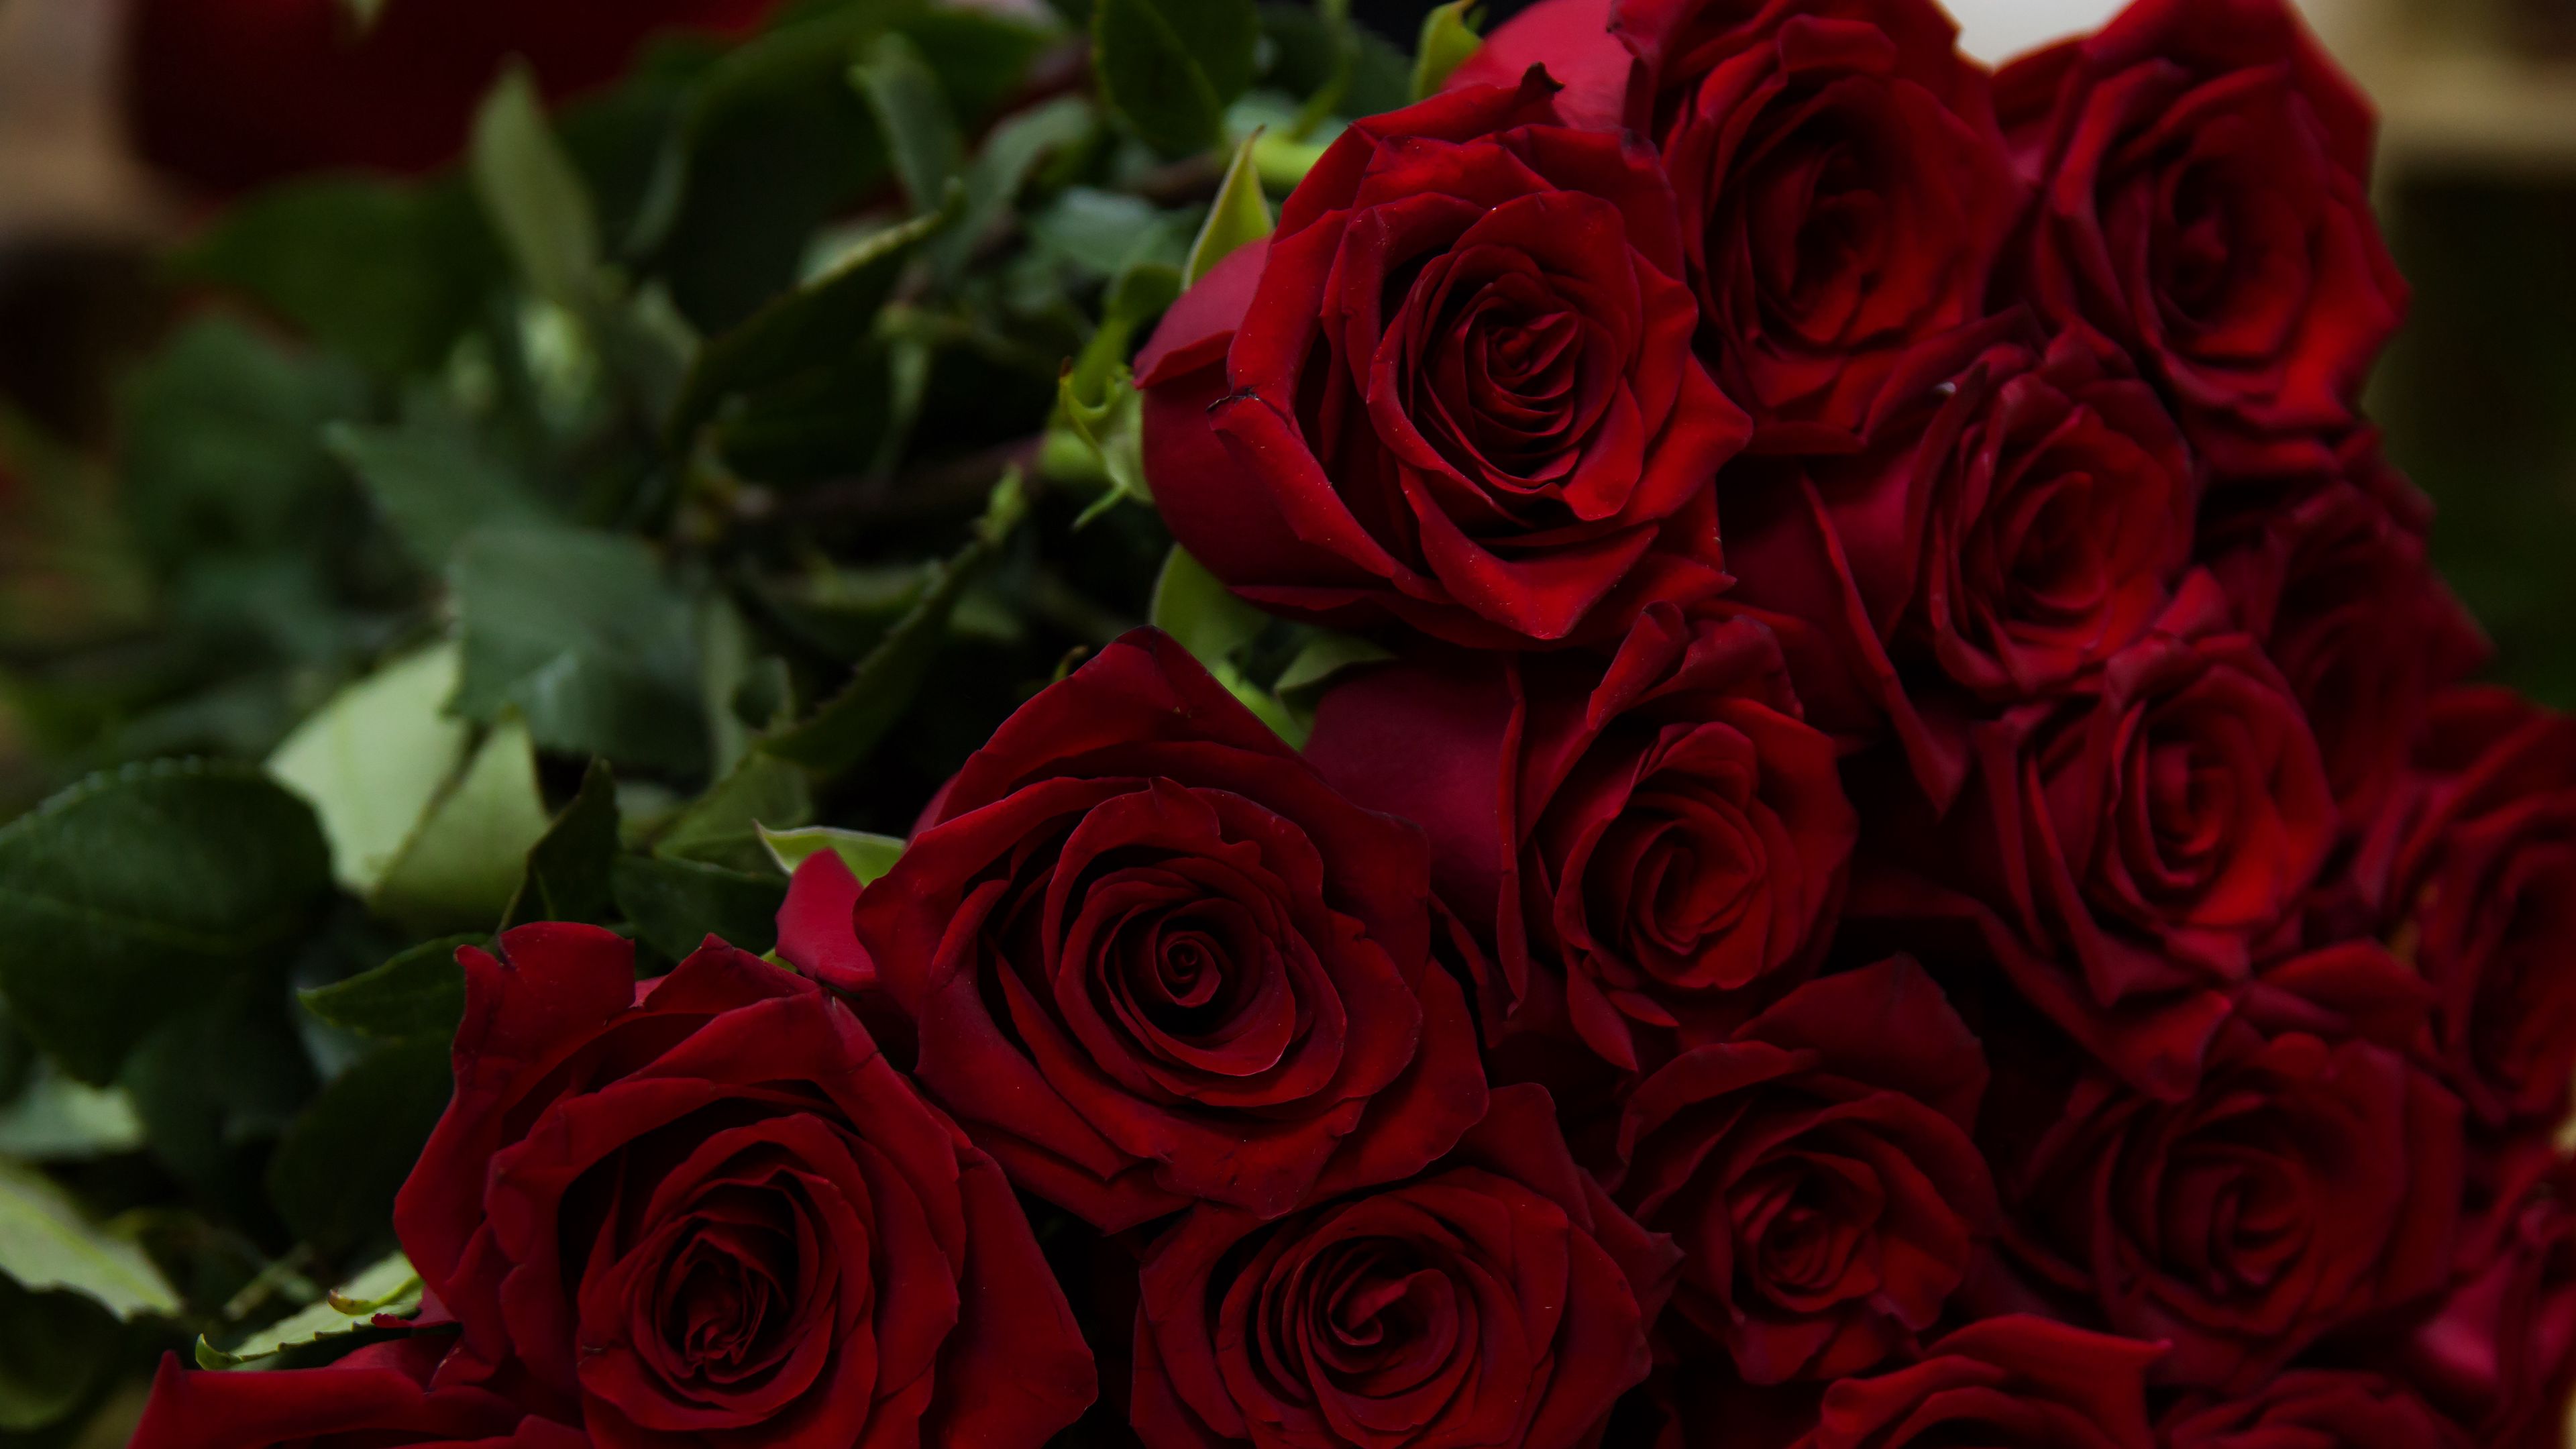 Download wallpaper 3840x2160 roses, red ...